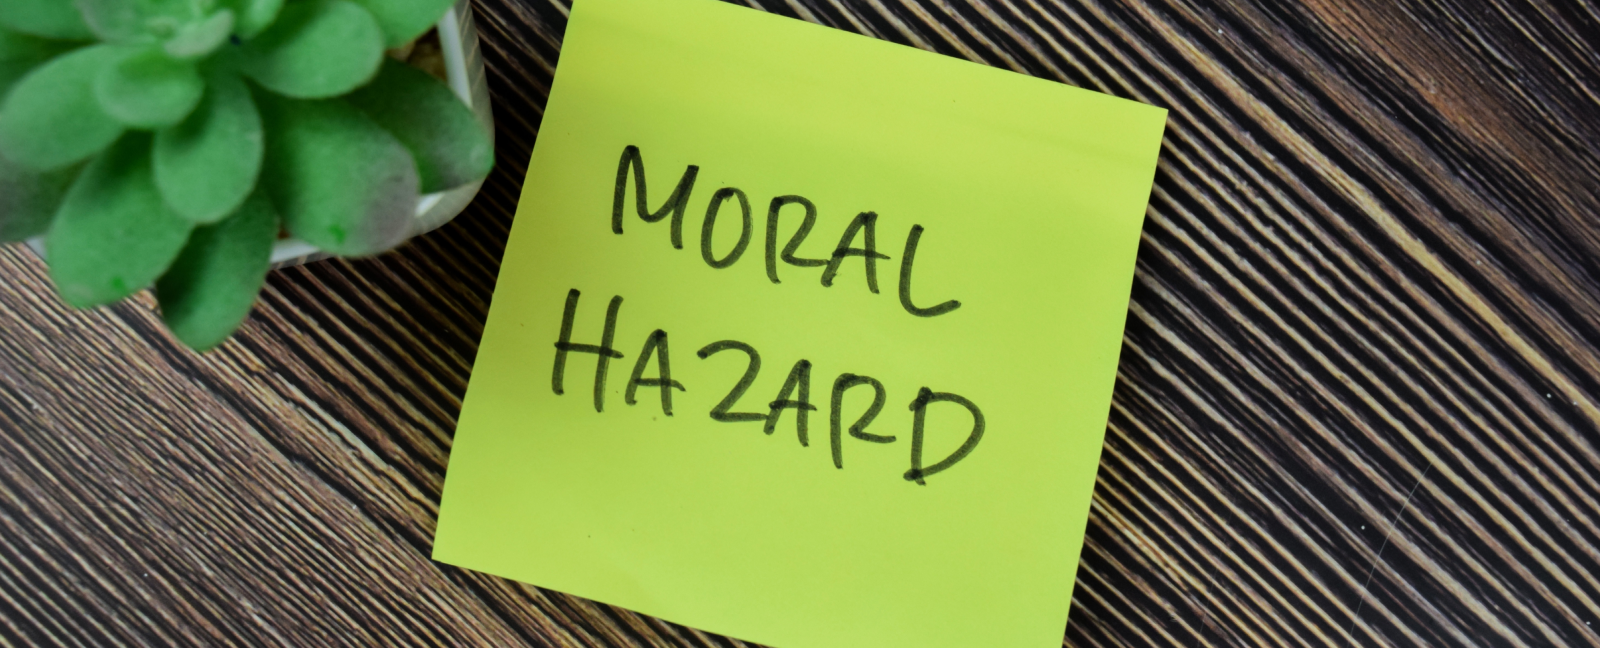 Moral Hazard: Why Actions Have Consequences